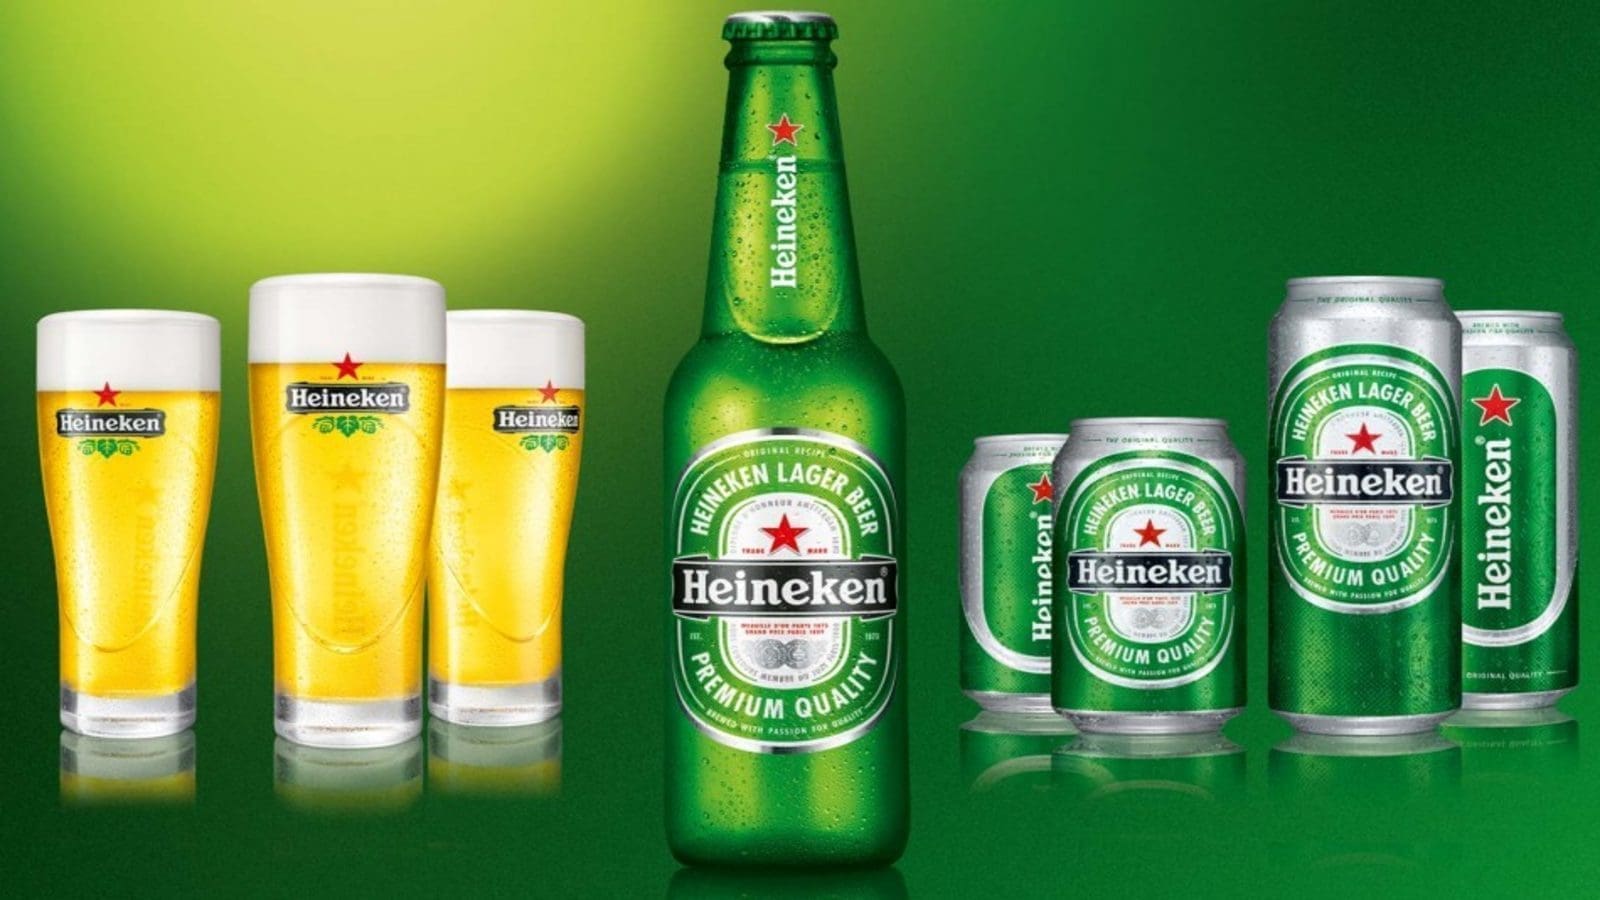 Heineken to set up US$200m new greenfield brewery to expand presence in South African market